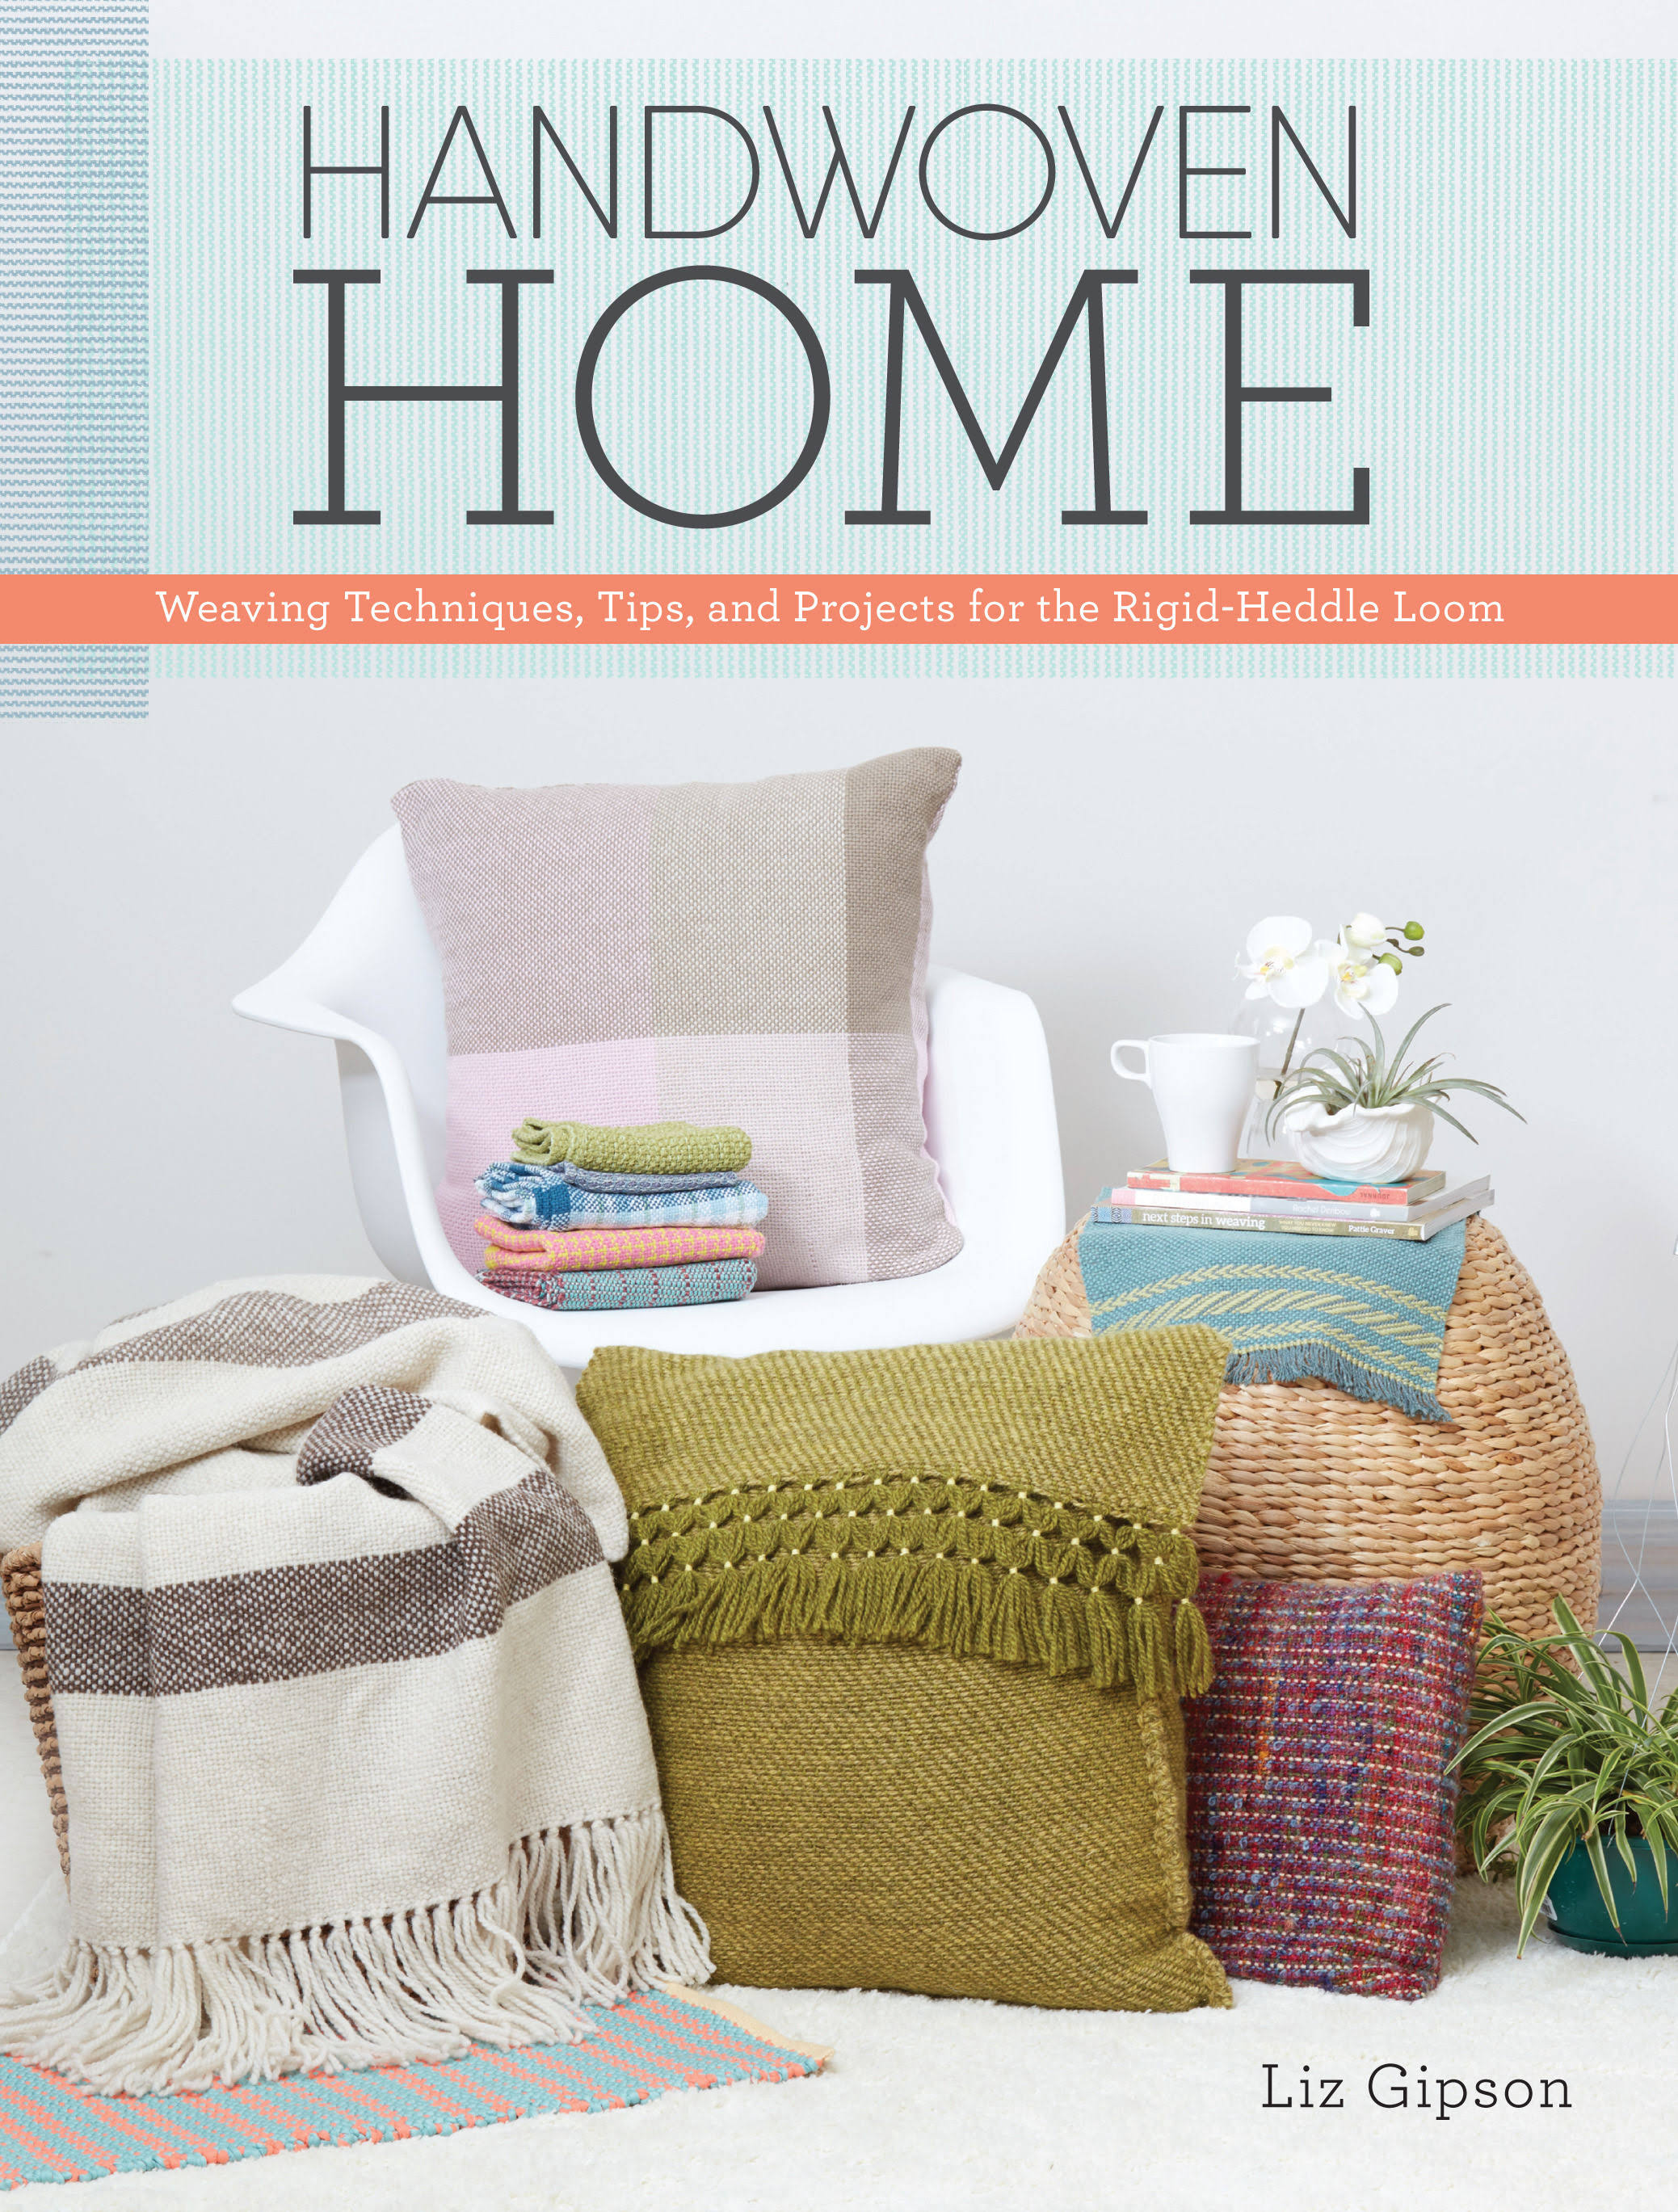 Handwoven Home: Weaving Techniques, Tips, and Projects for the Rigid-Heddle Loom [Book]